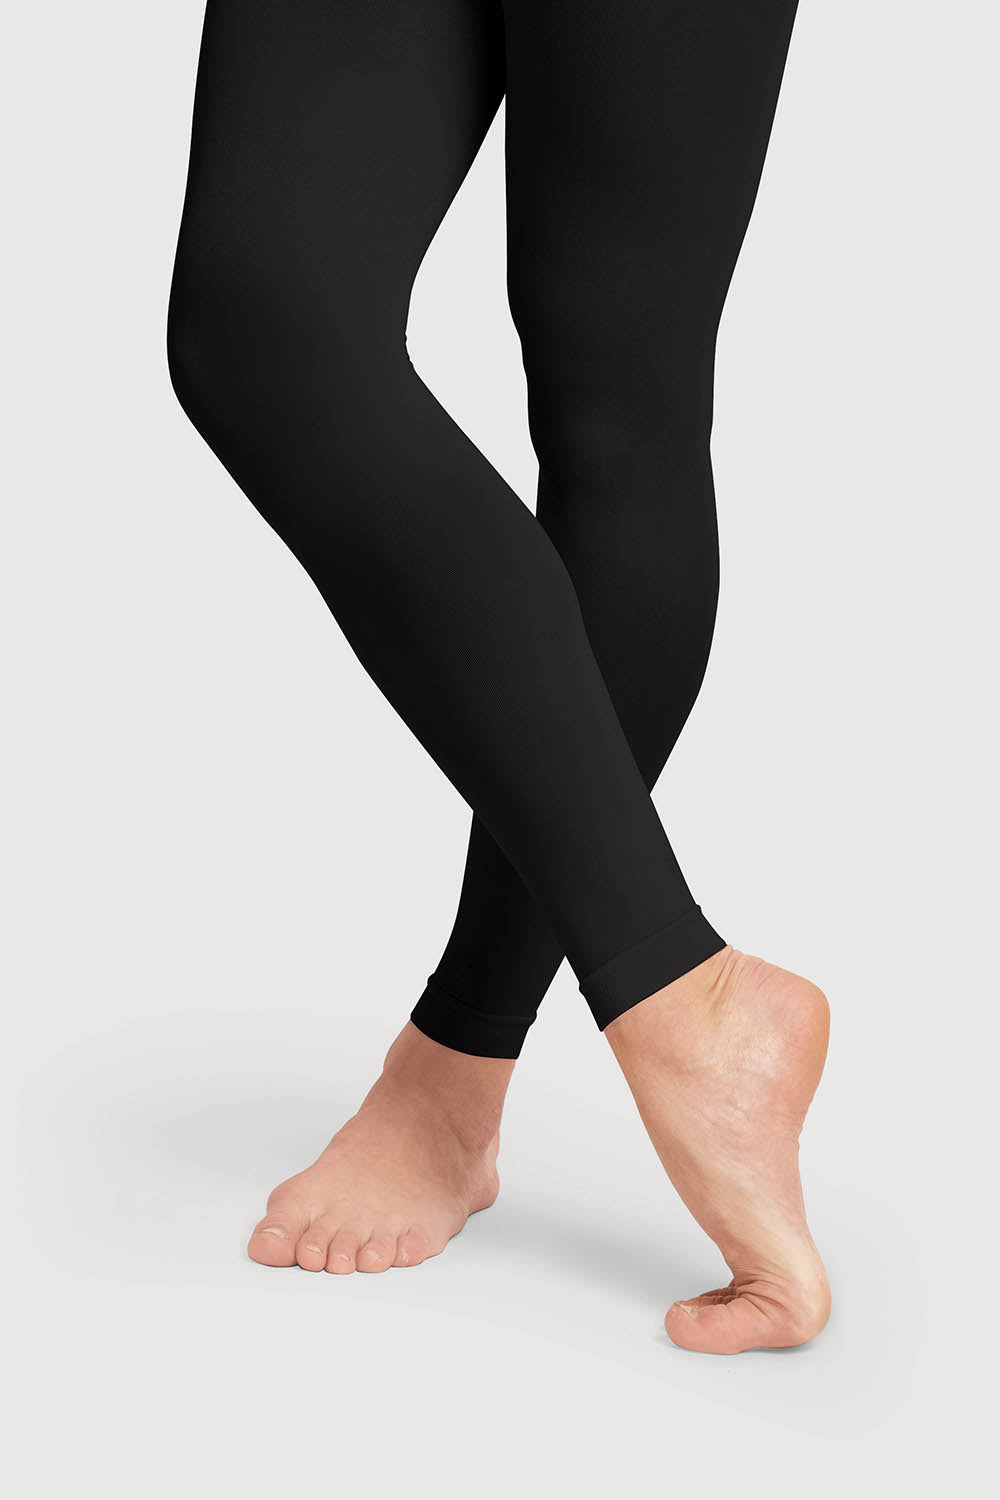 T0985L - Bloch Contoursoft Womens Footless Tights